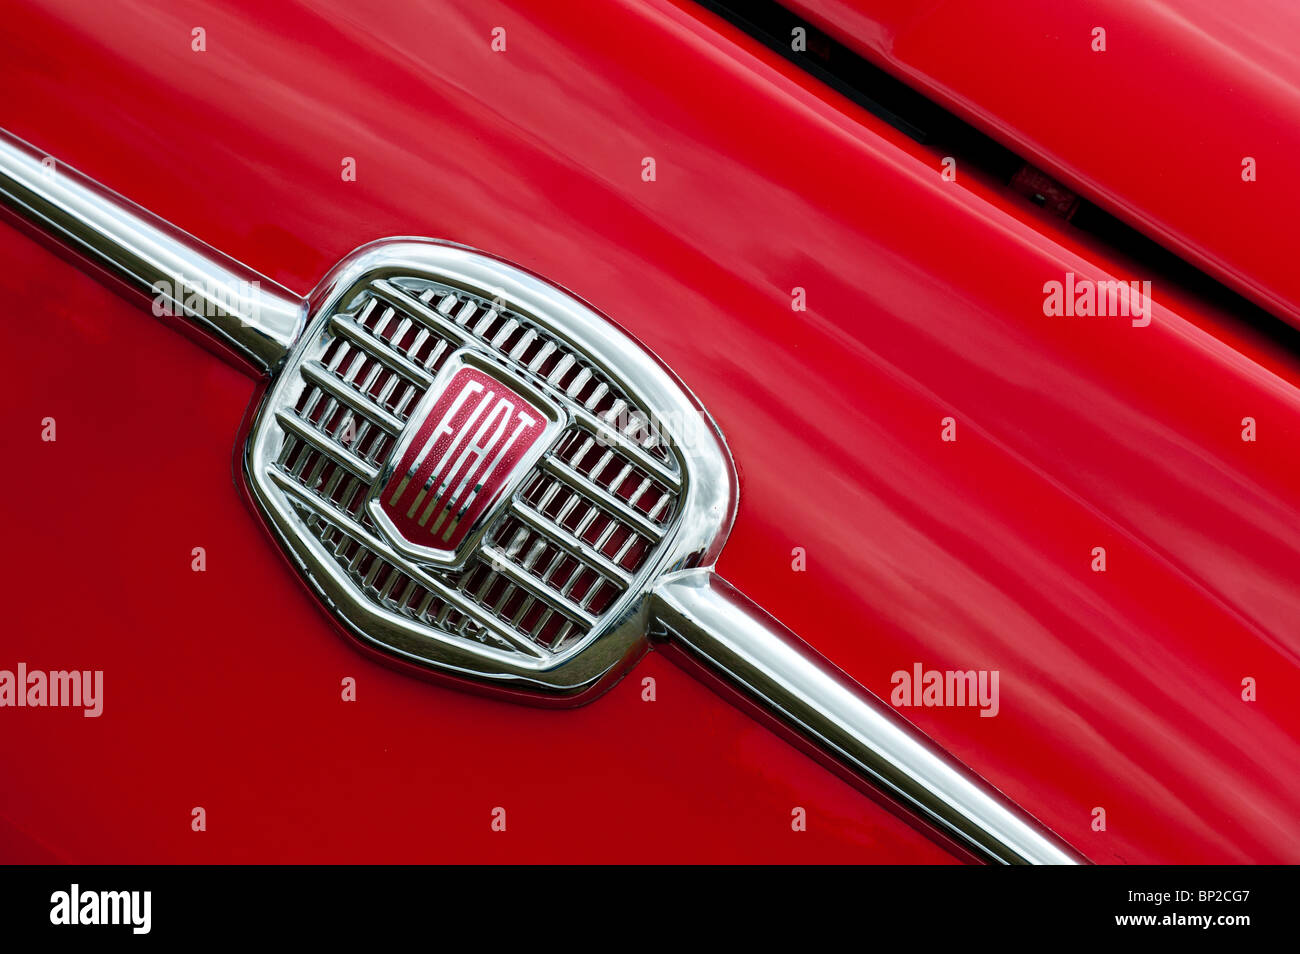 1968 Fiat 500 chrome car badge on a red car close up Stock Photo